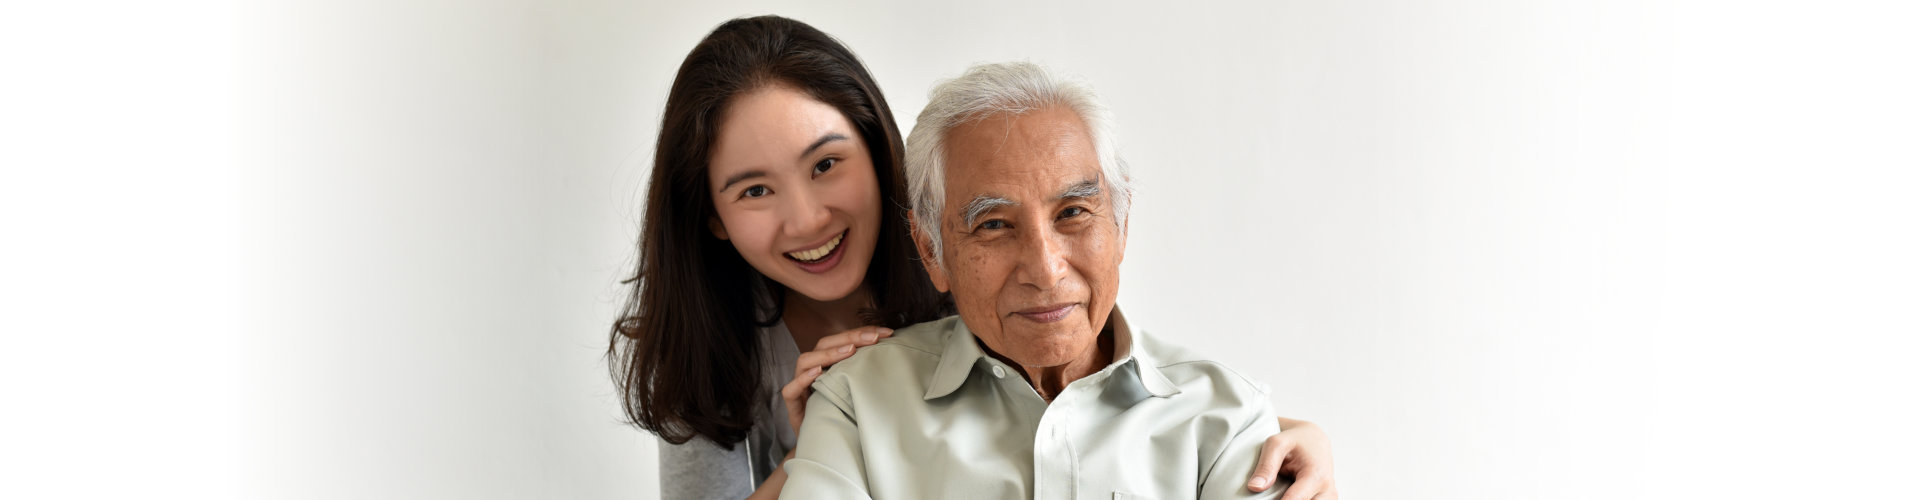 young woman holding senior man in shoulder